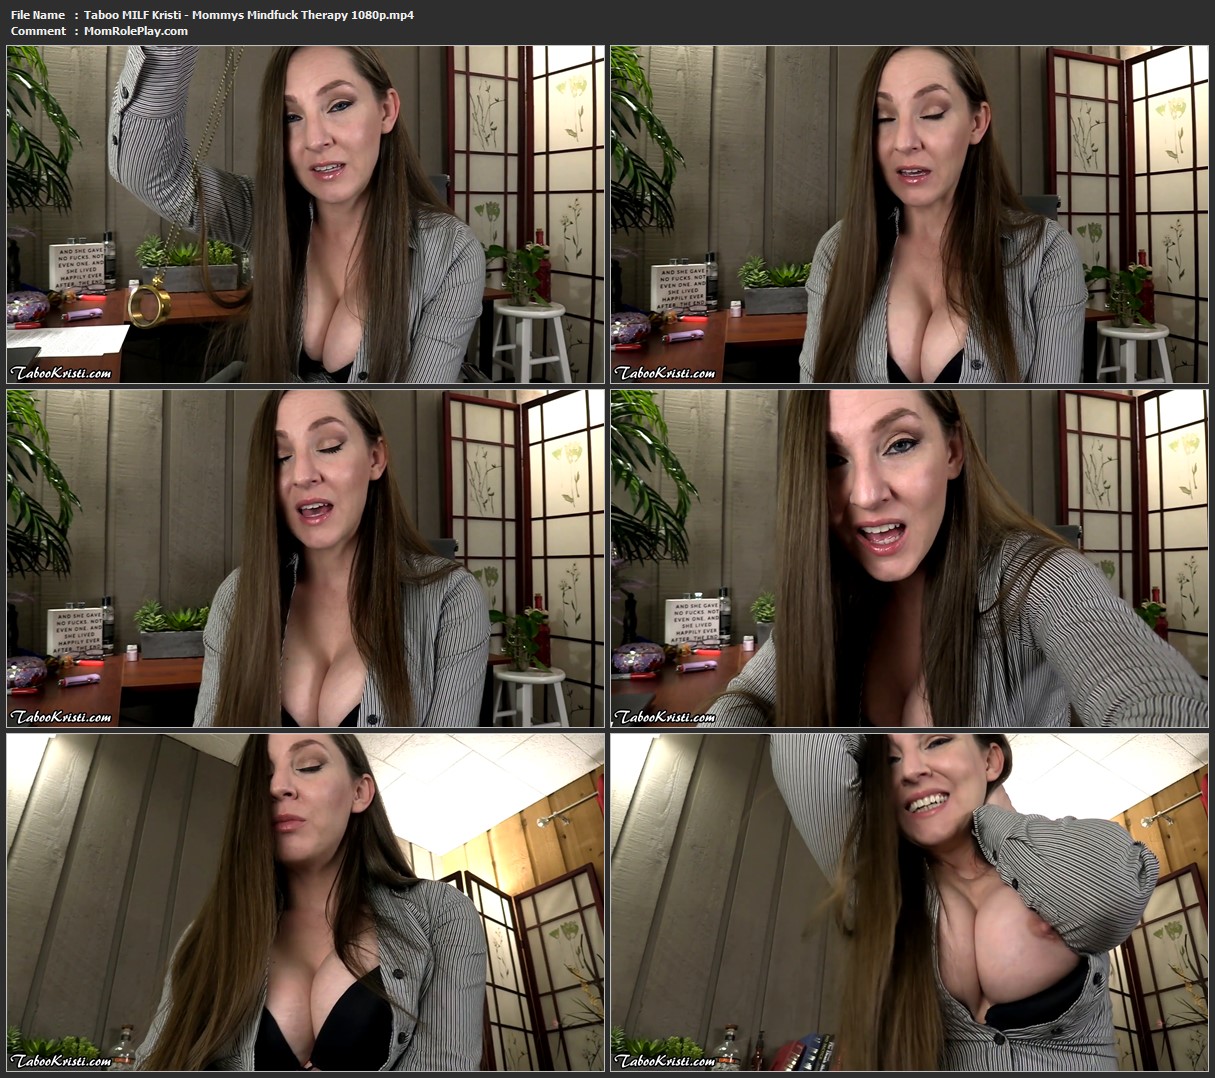 Taboo MILF Kristi - Mommy's Mindfuck Therapy